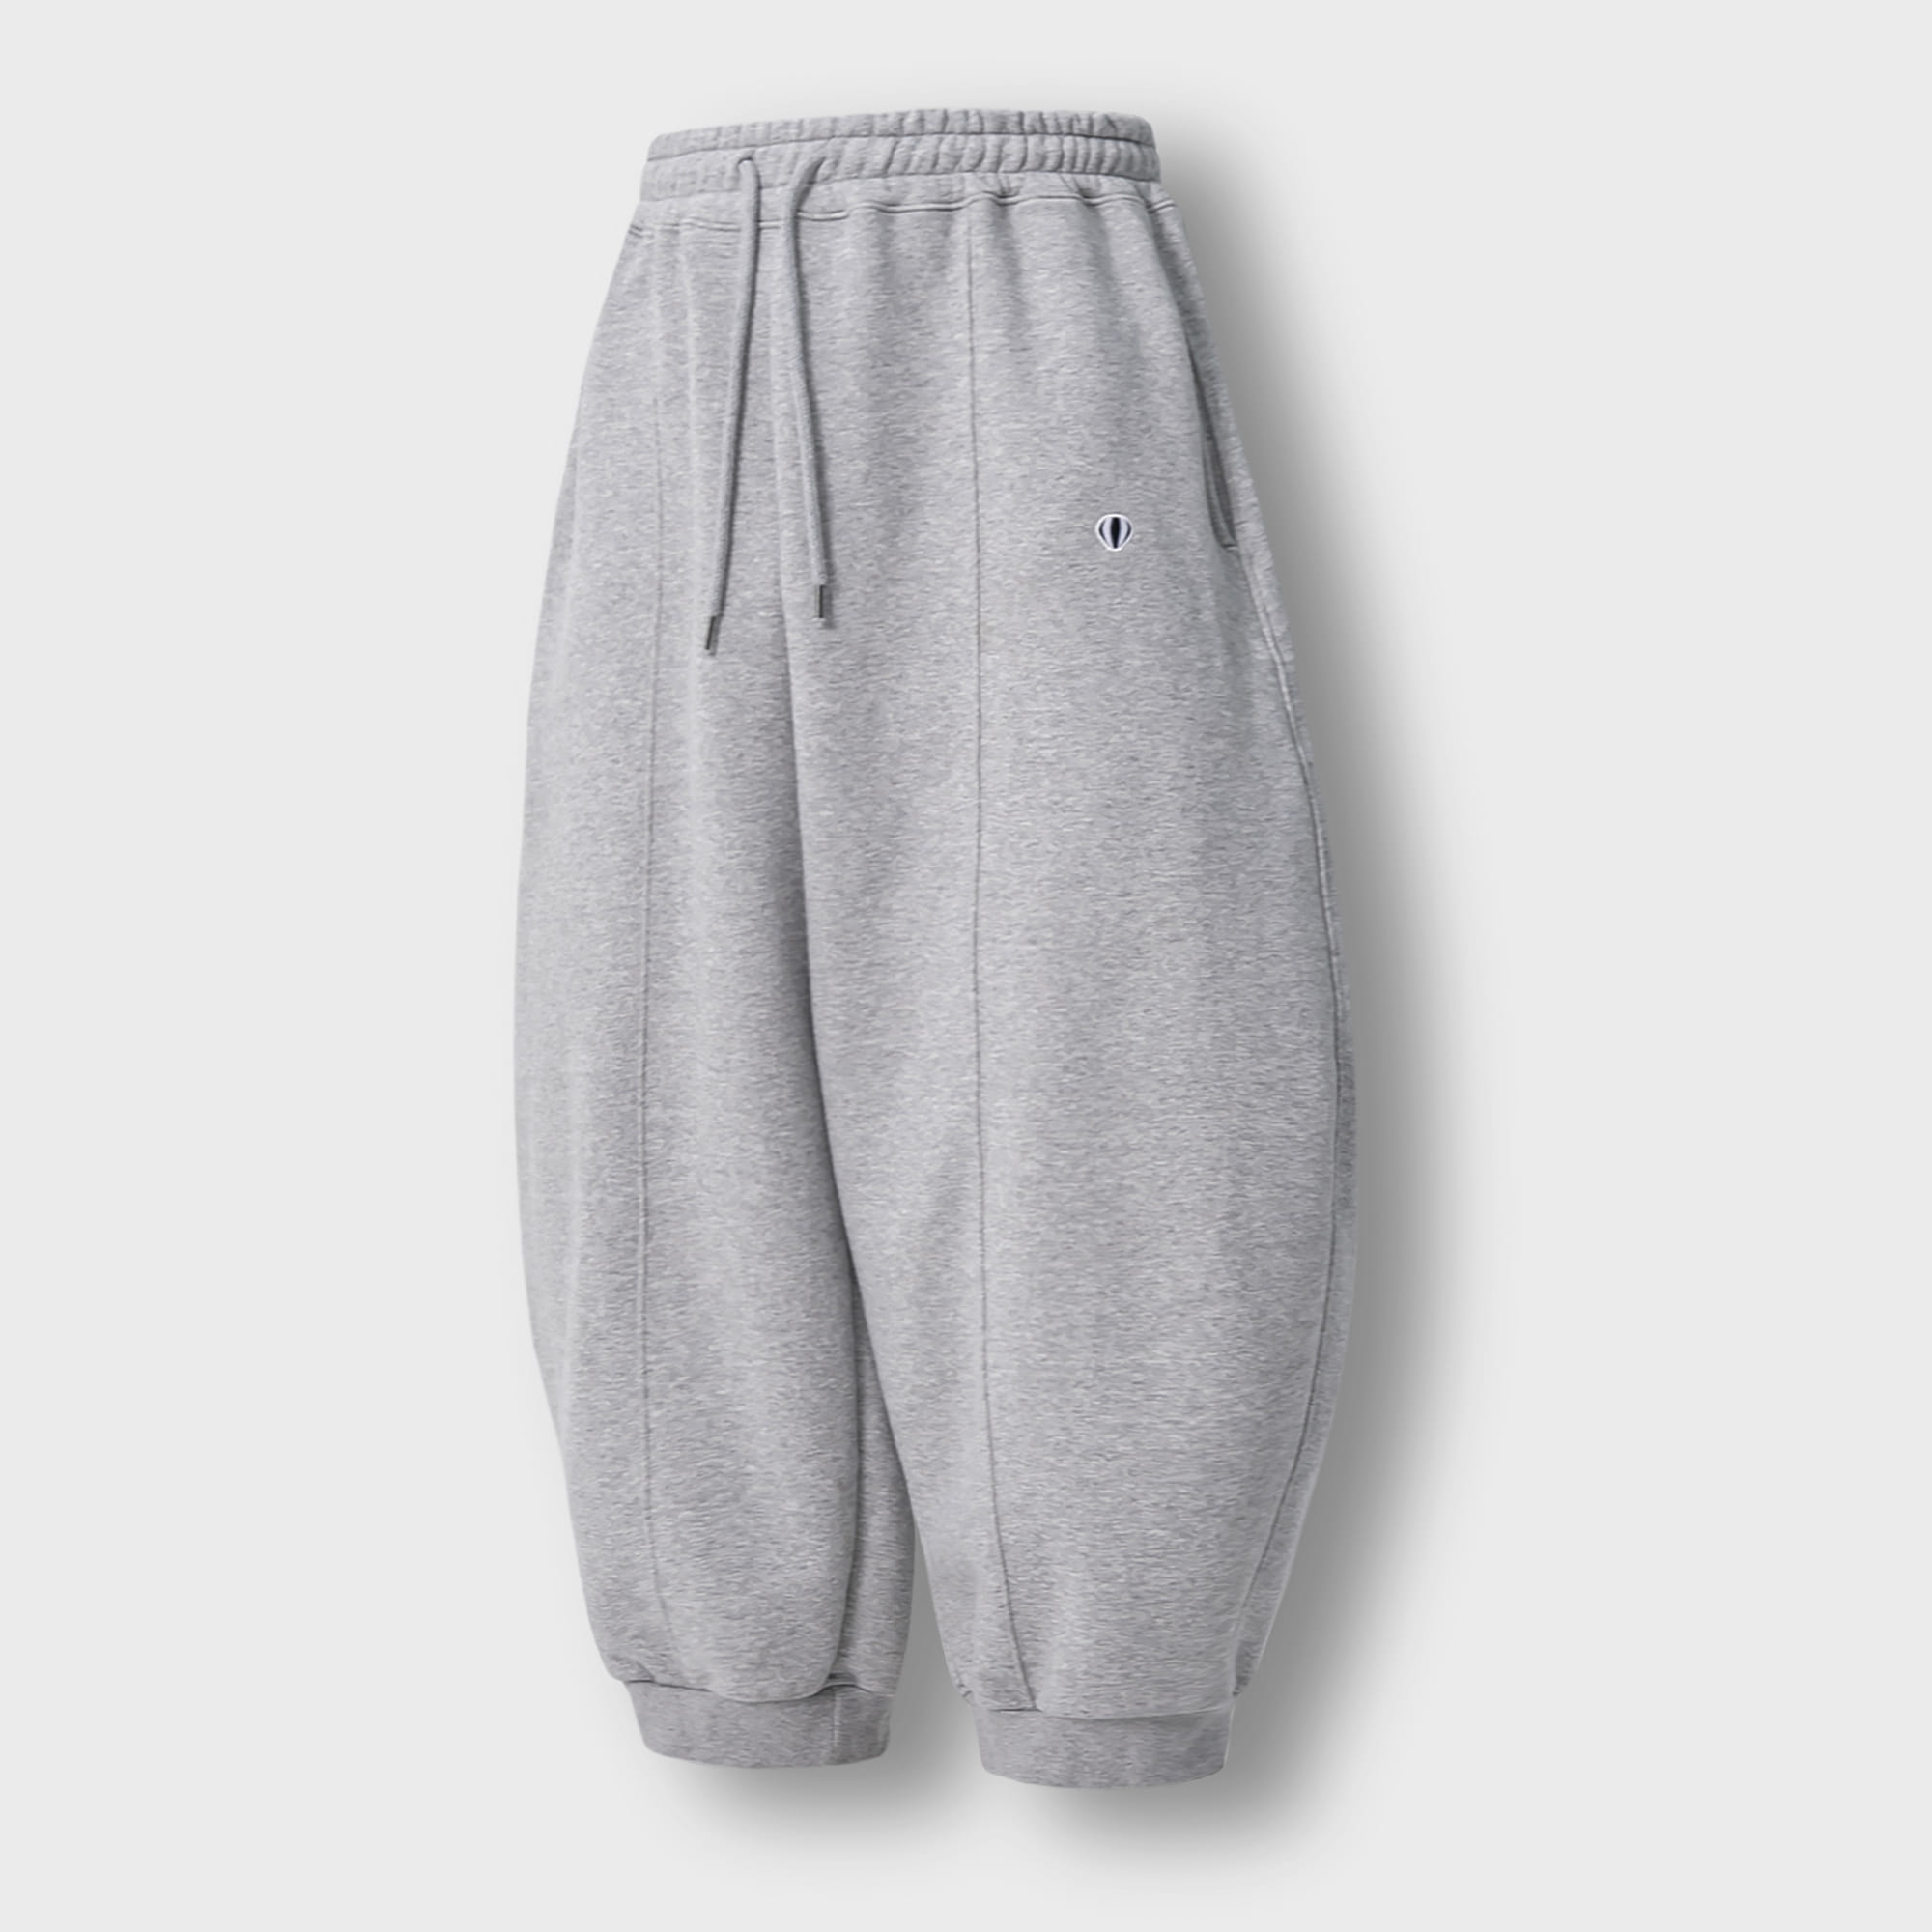 [AG] Wappen Incision Angle Sweat Pants - Grey